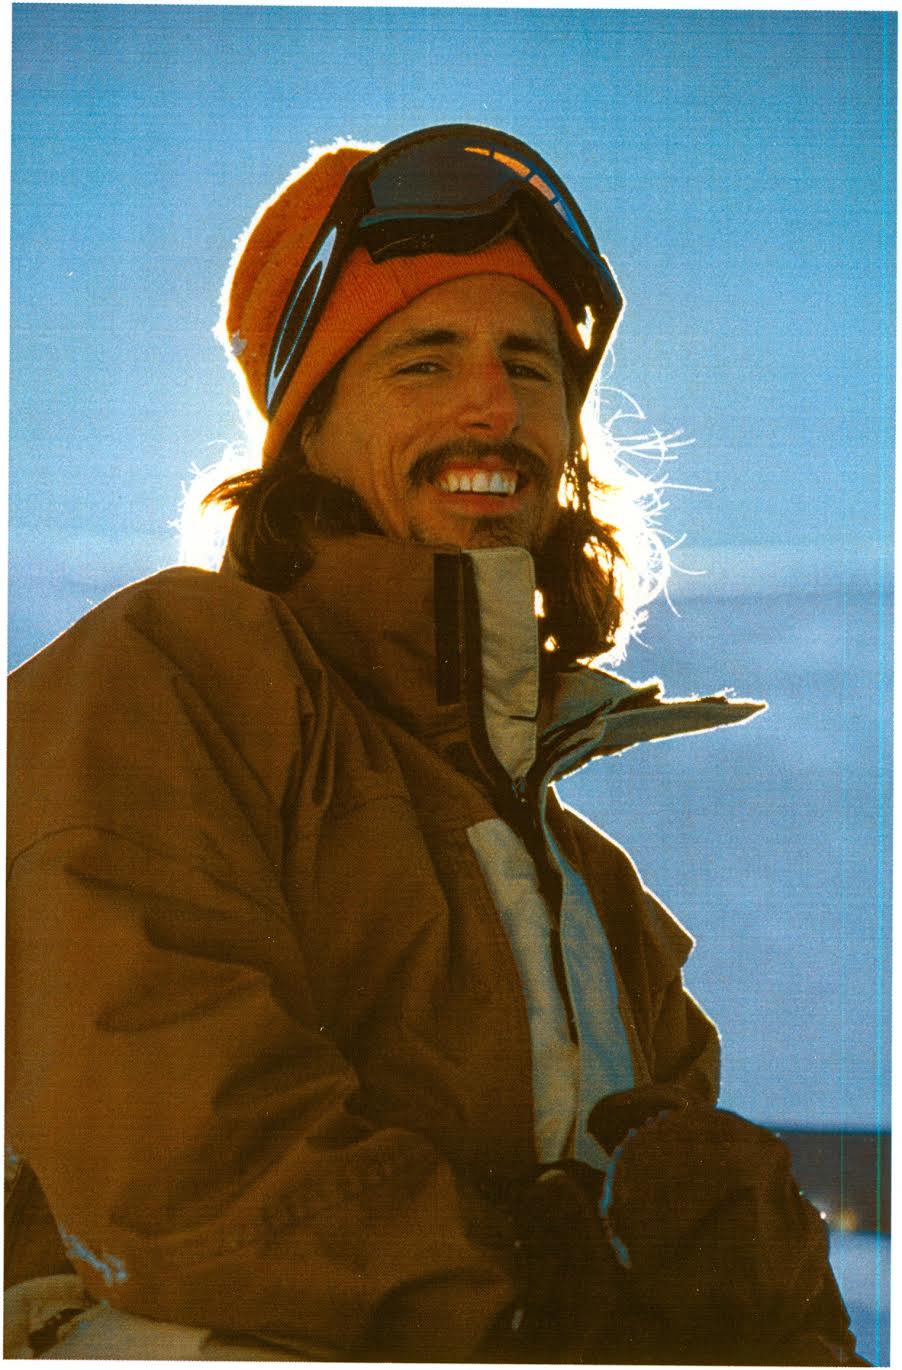 Craig Kelly, Class of 2012 U.S. Ski and Snowboard Hall of Fame. Photo Credit: U.S Ski and Snowboard Hall of Fame